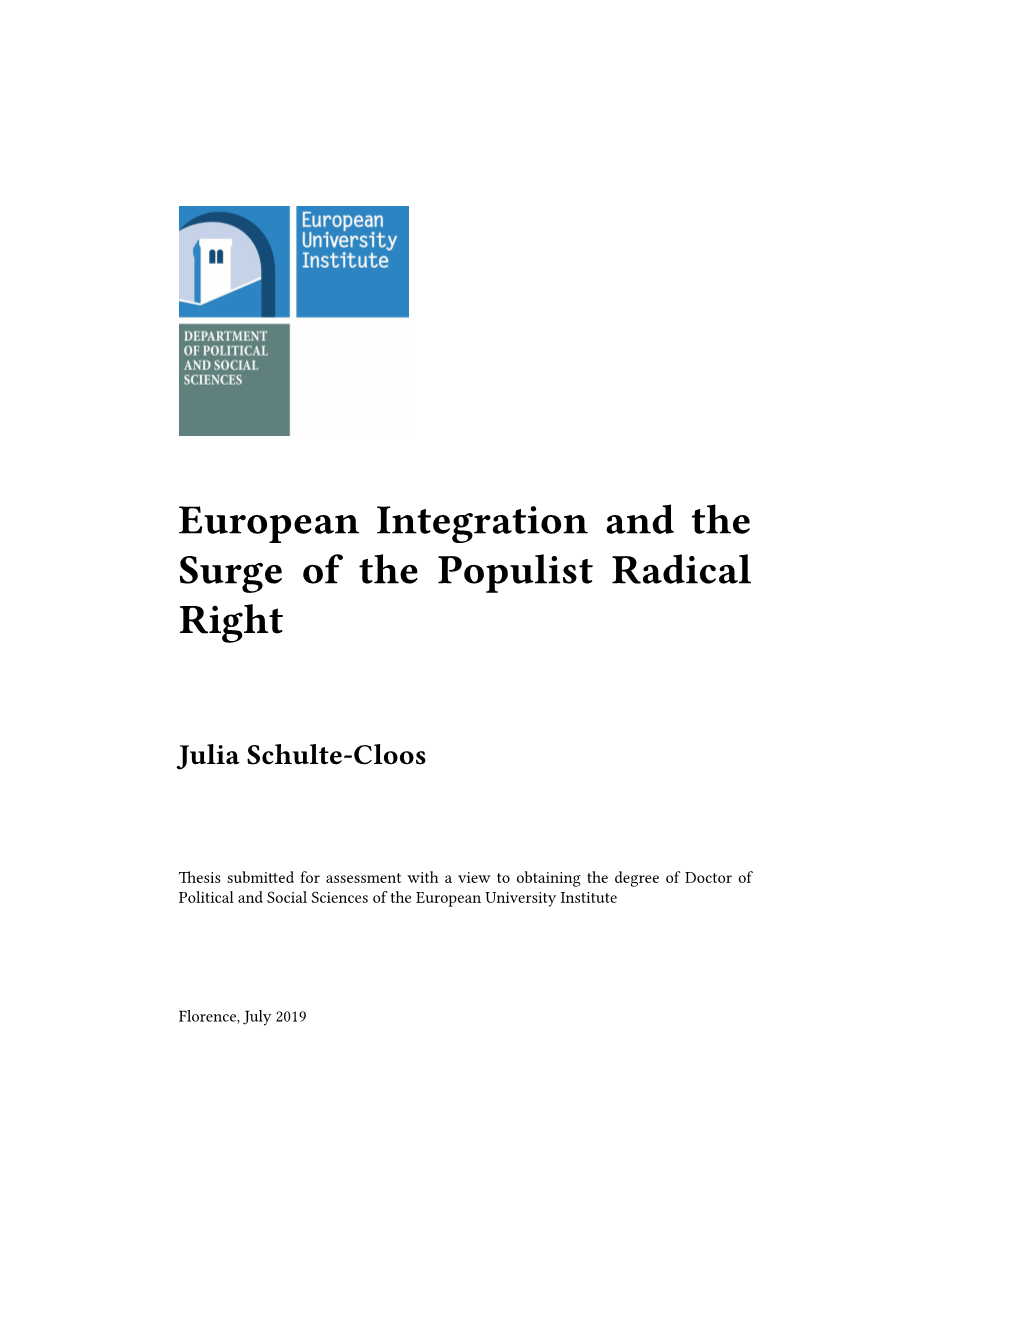 European Integration and the Surge